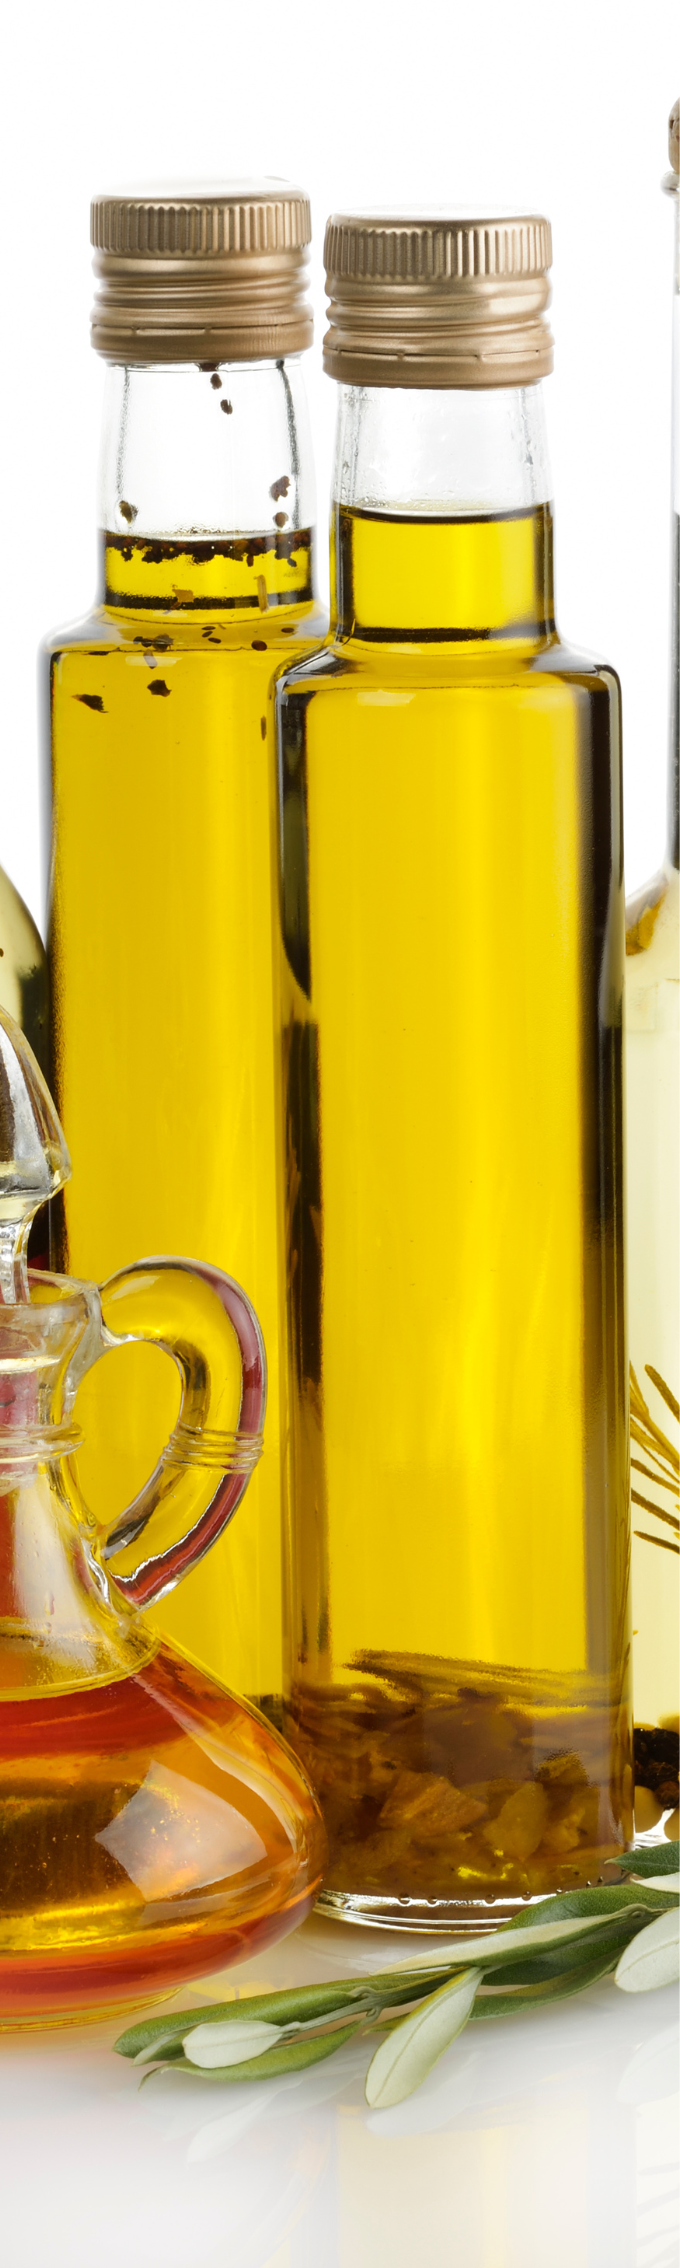 The healthiest cooking oils